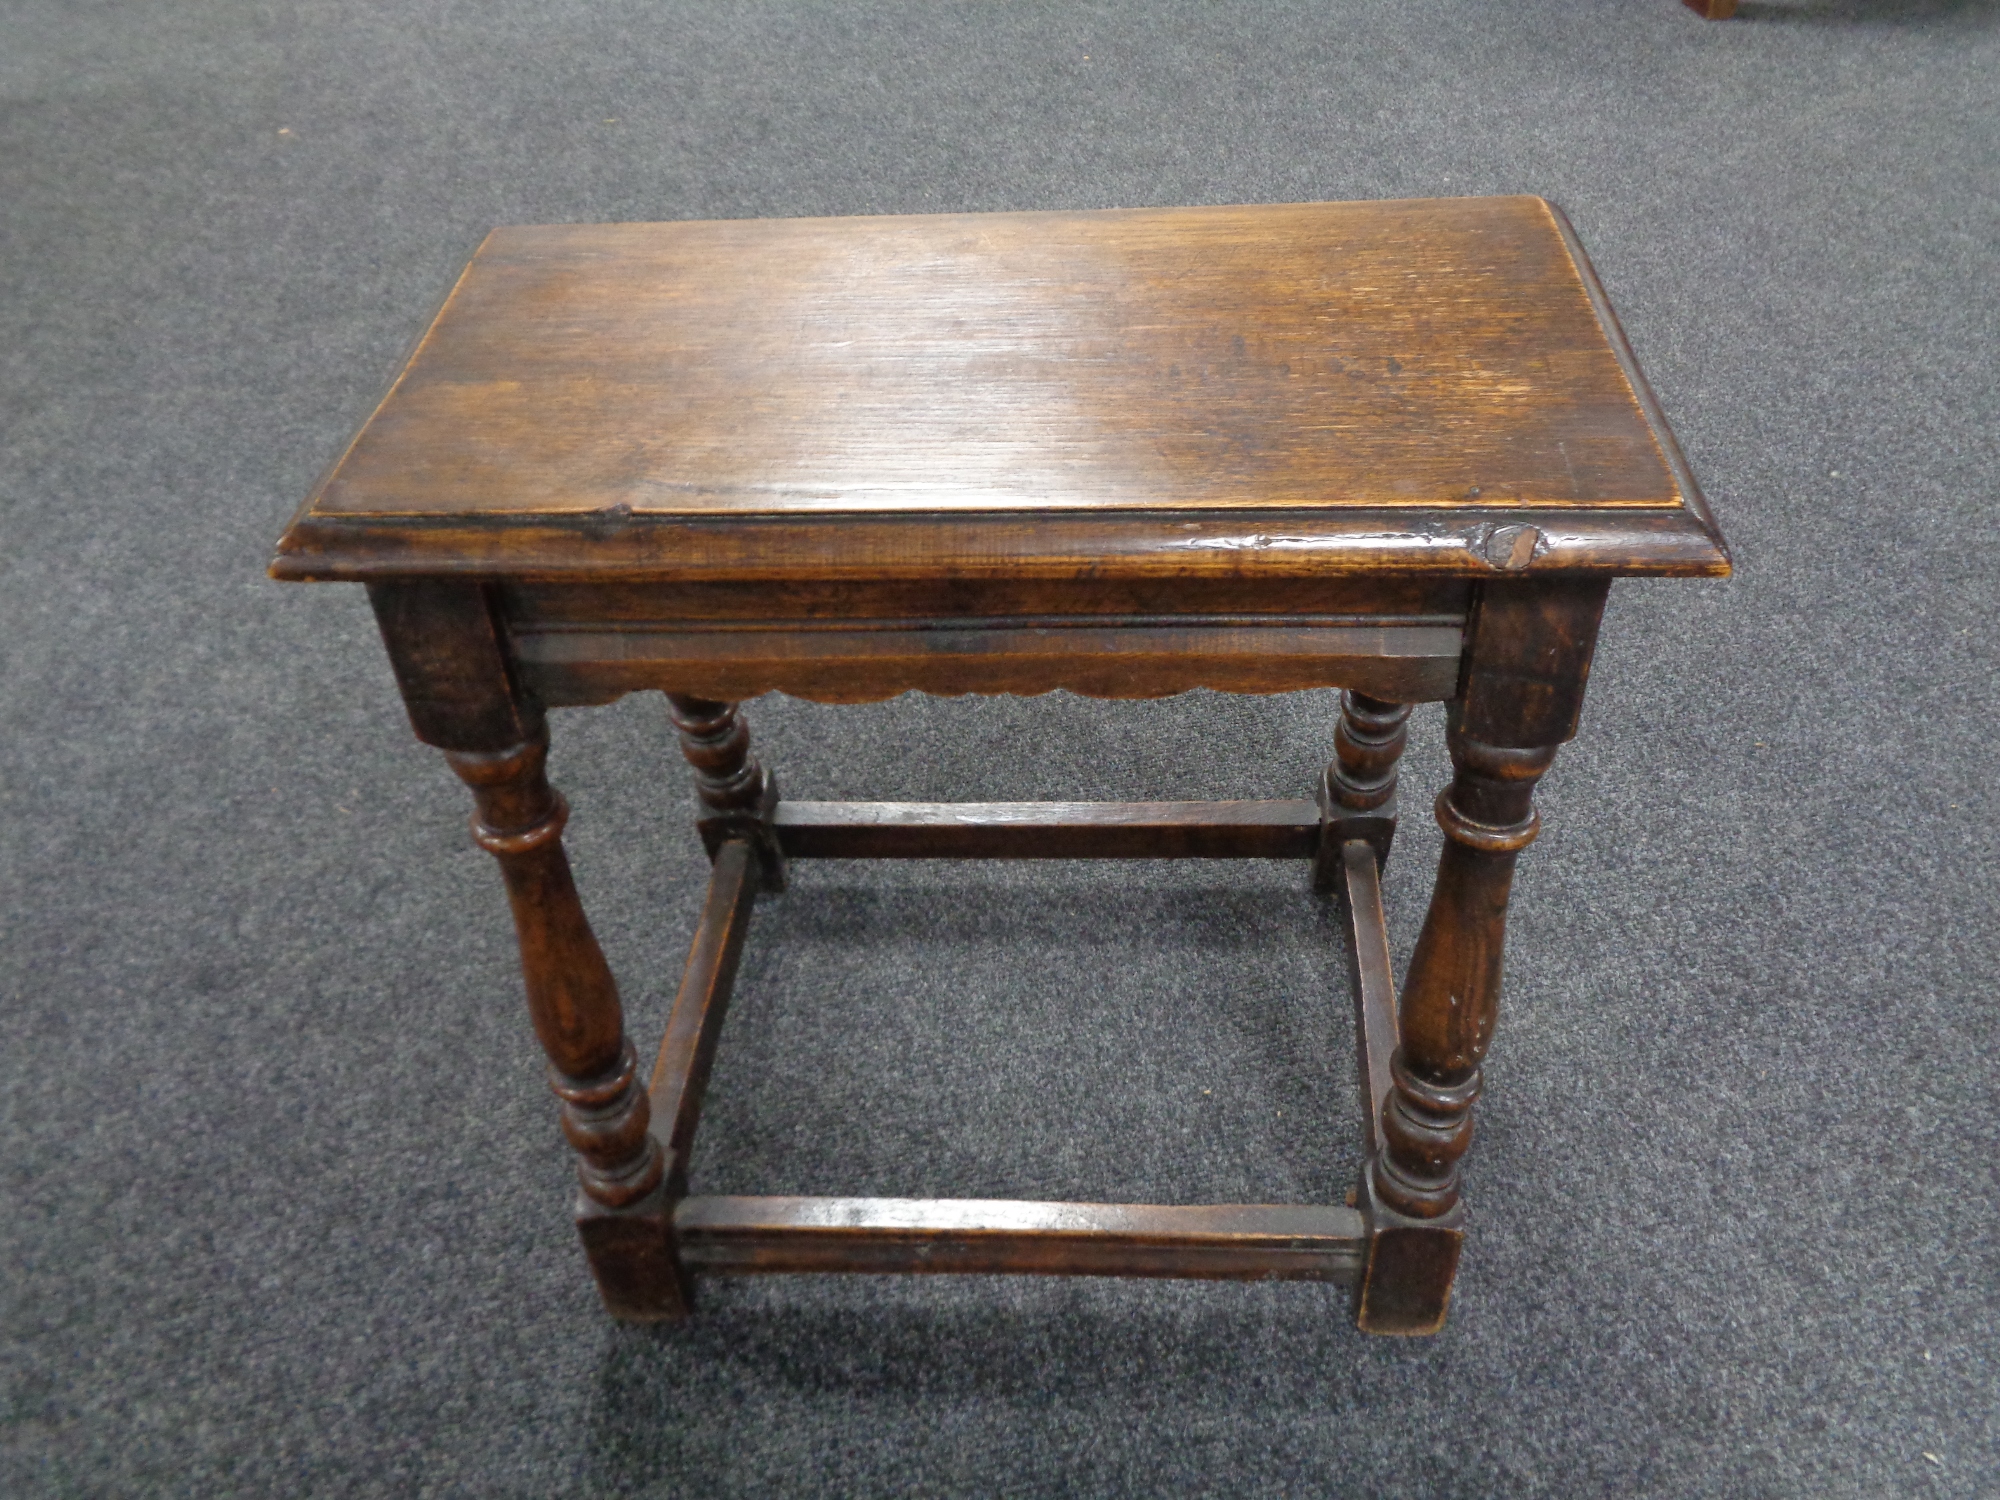 An antique oak jointed stool.